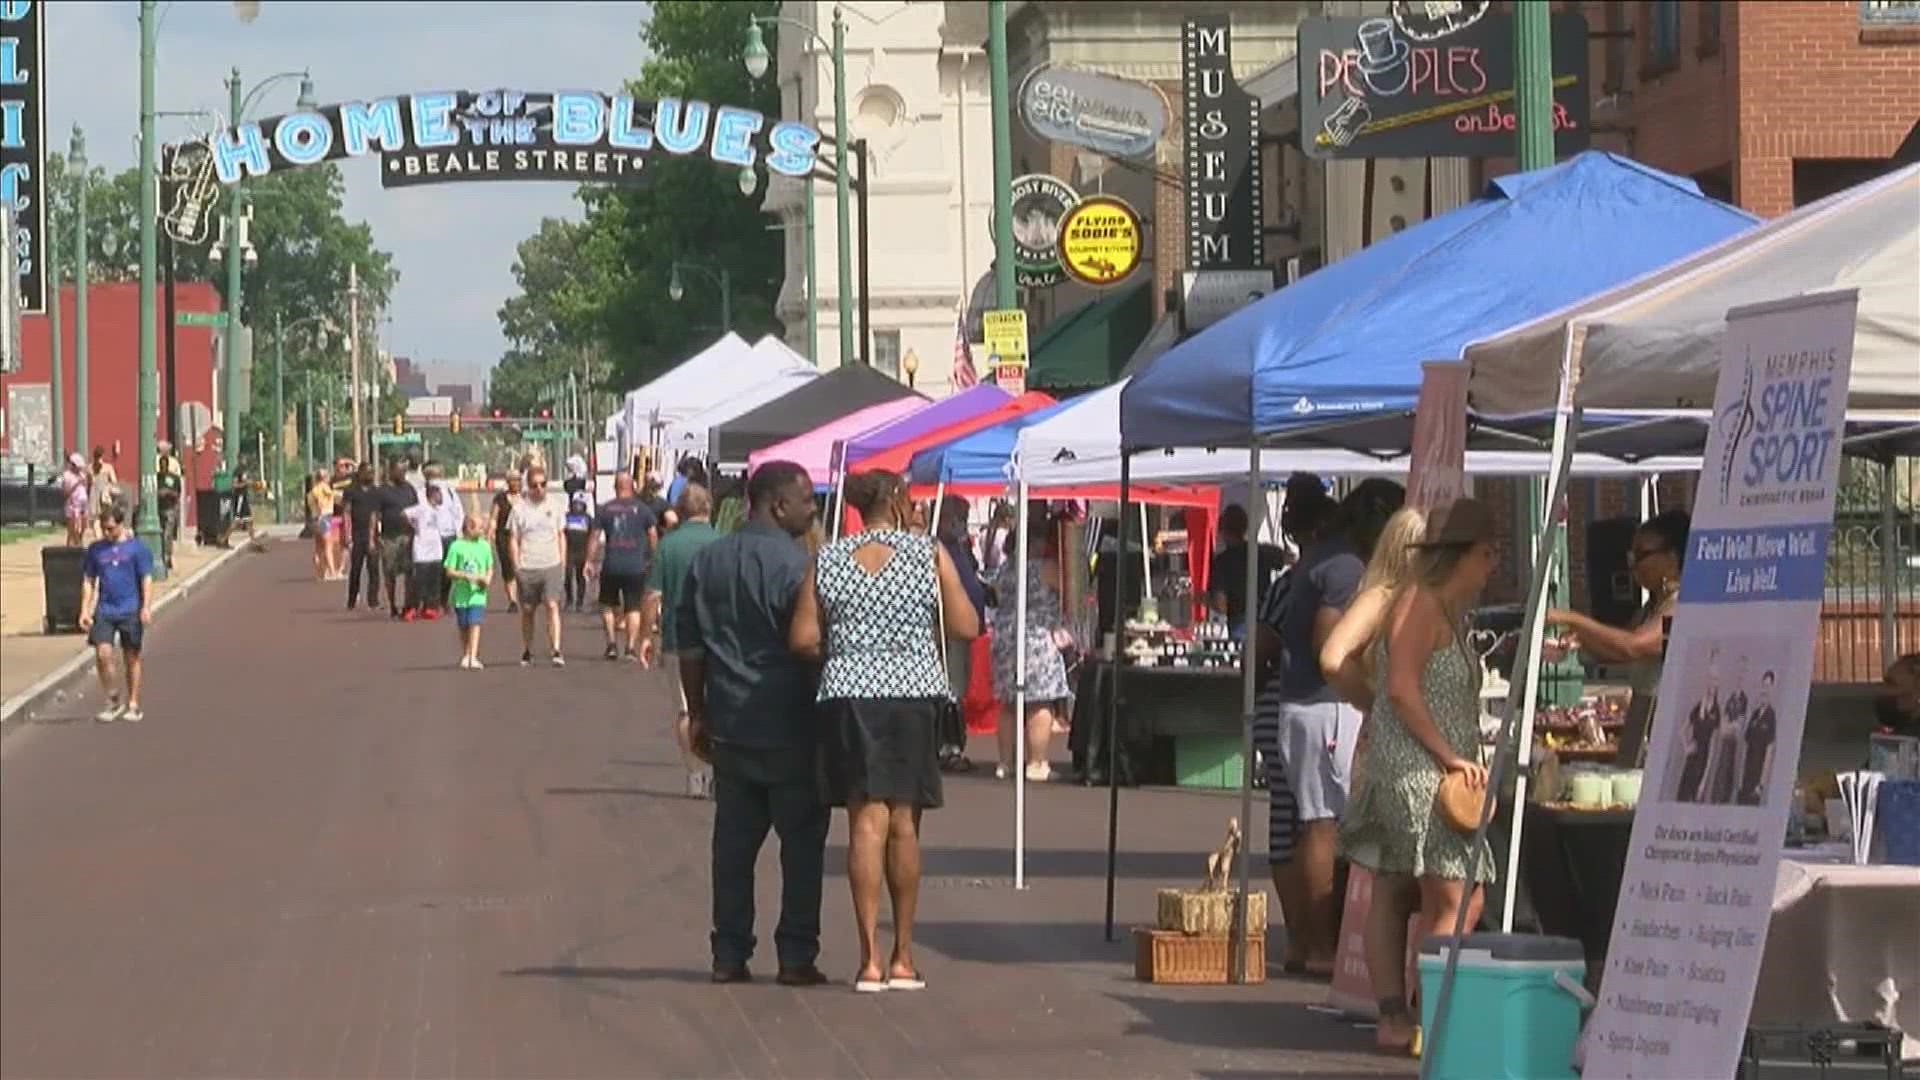 The Beale Street Artcrawl is a free event that showcases local artist. Support local artist in Memphis by purchasing something you like and telling a friend.